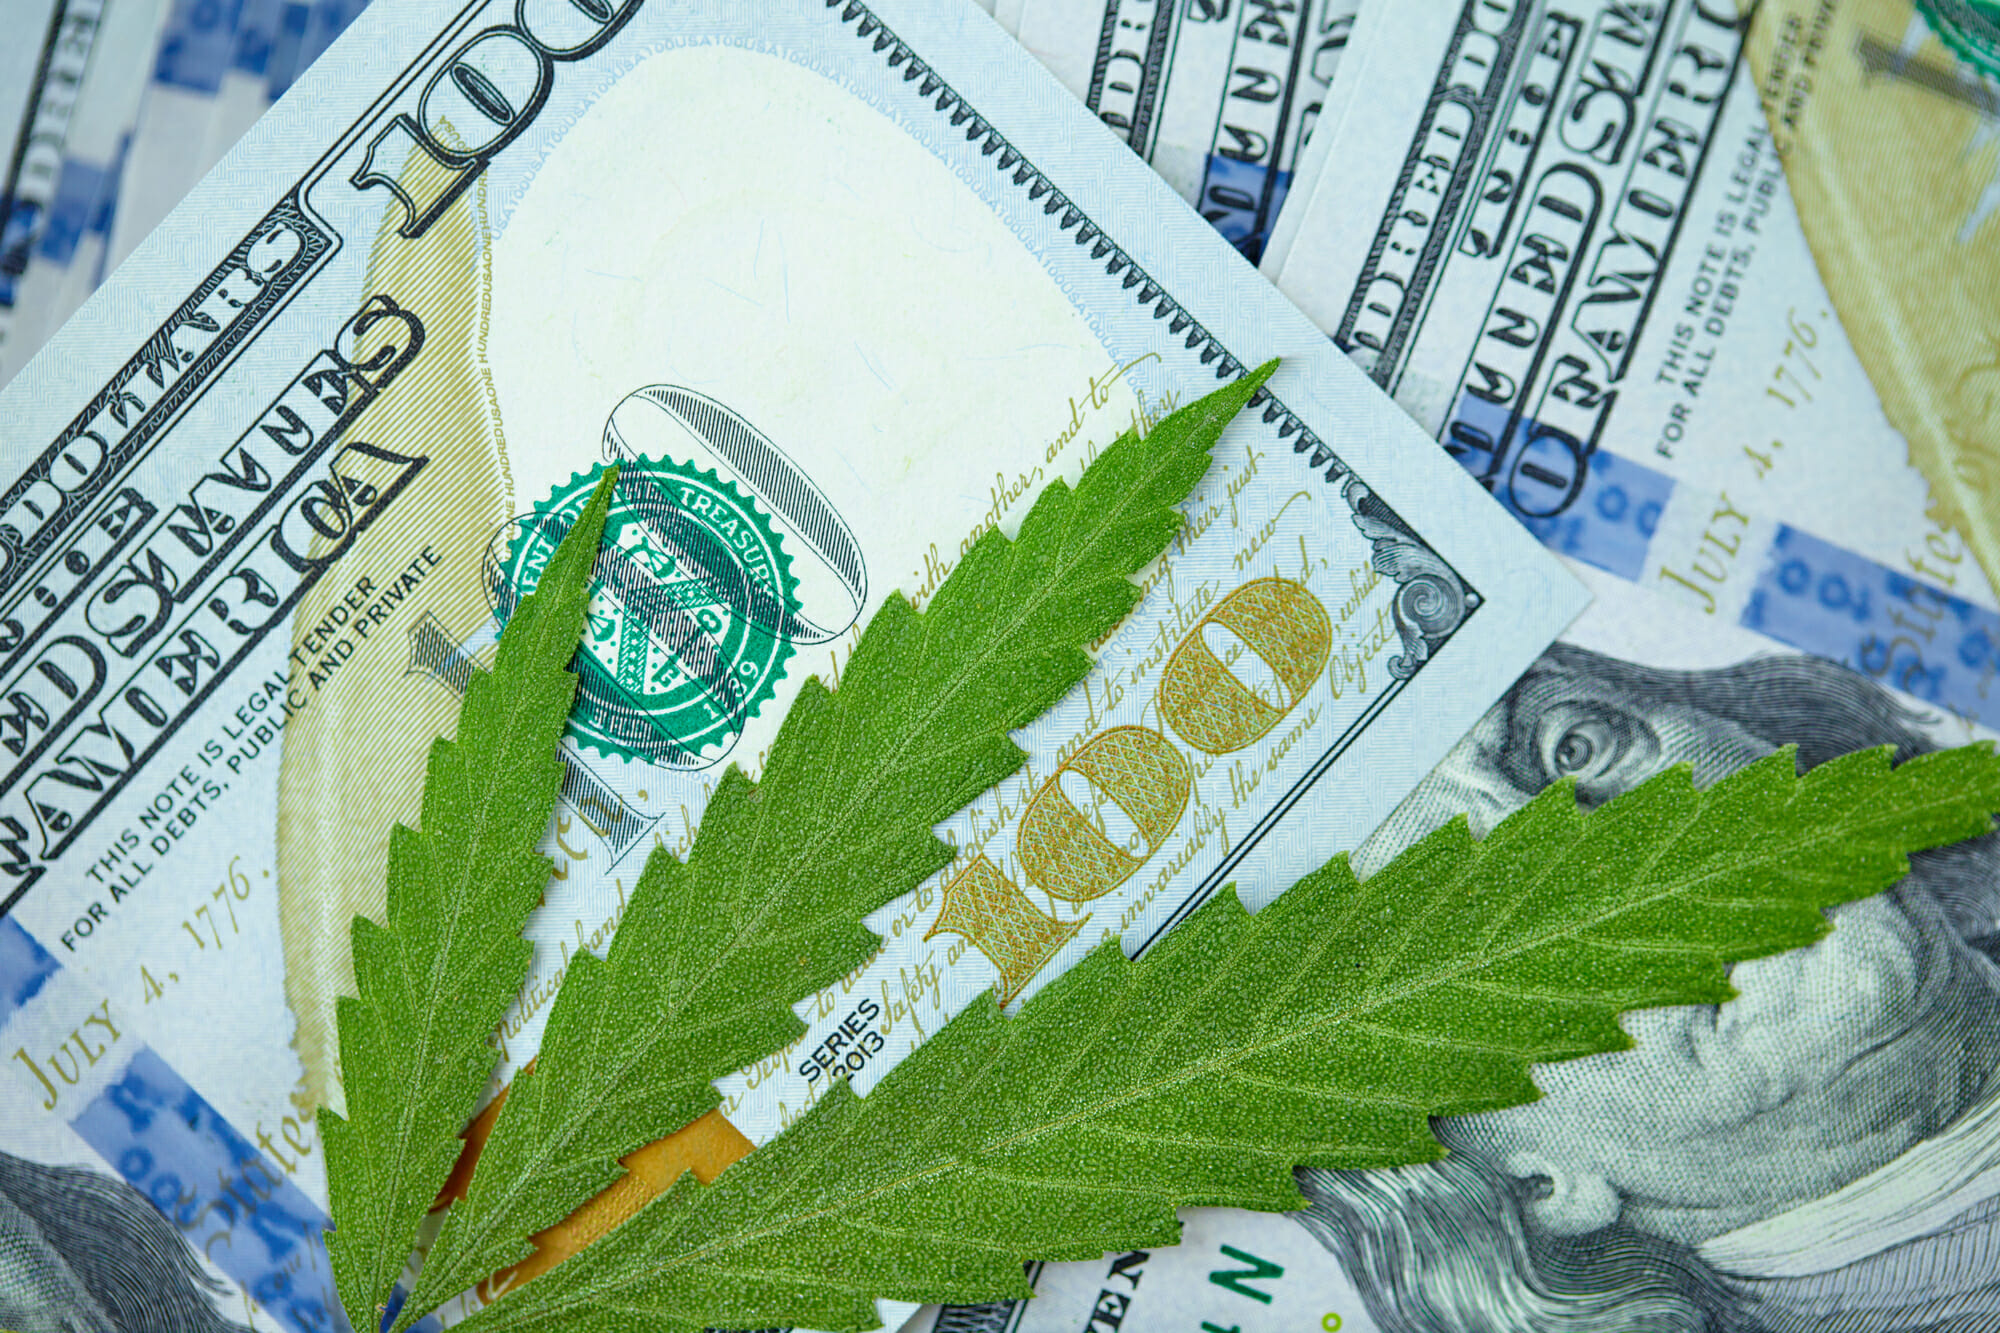 American one hundred dollar bills with cannabis leaves